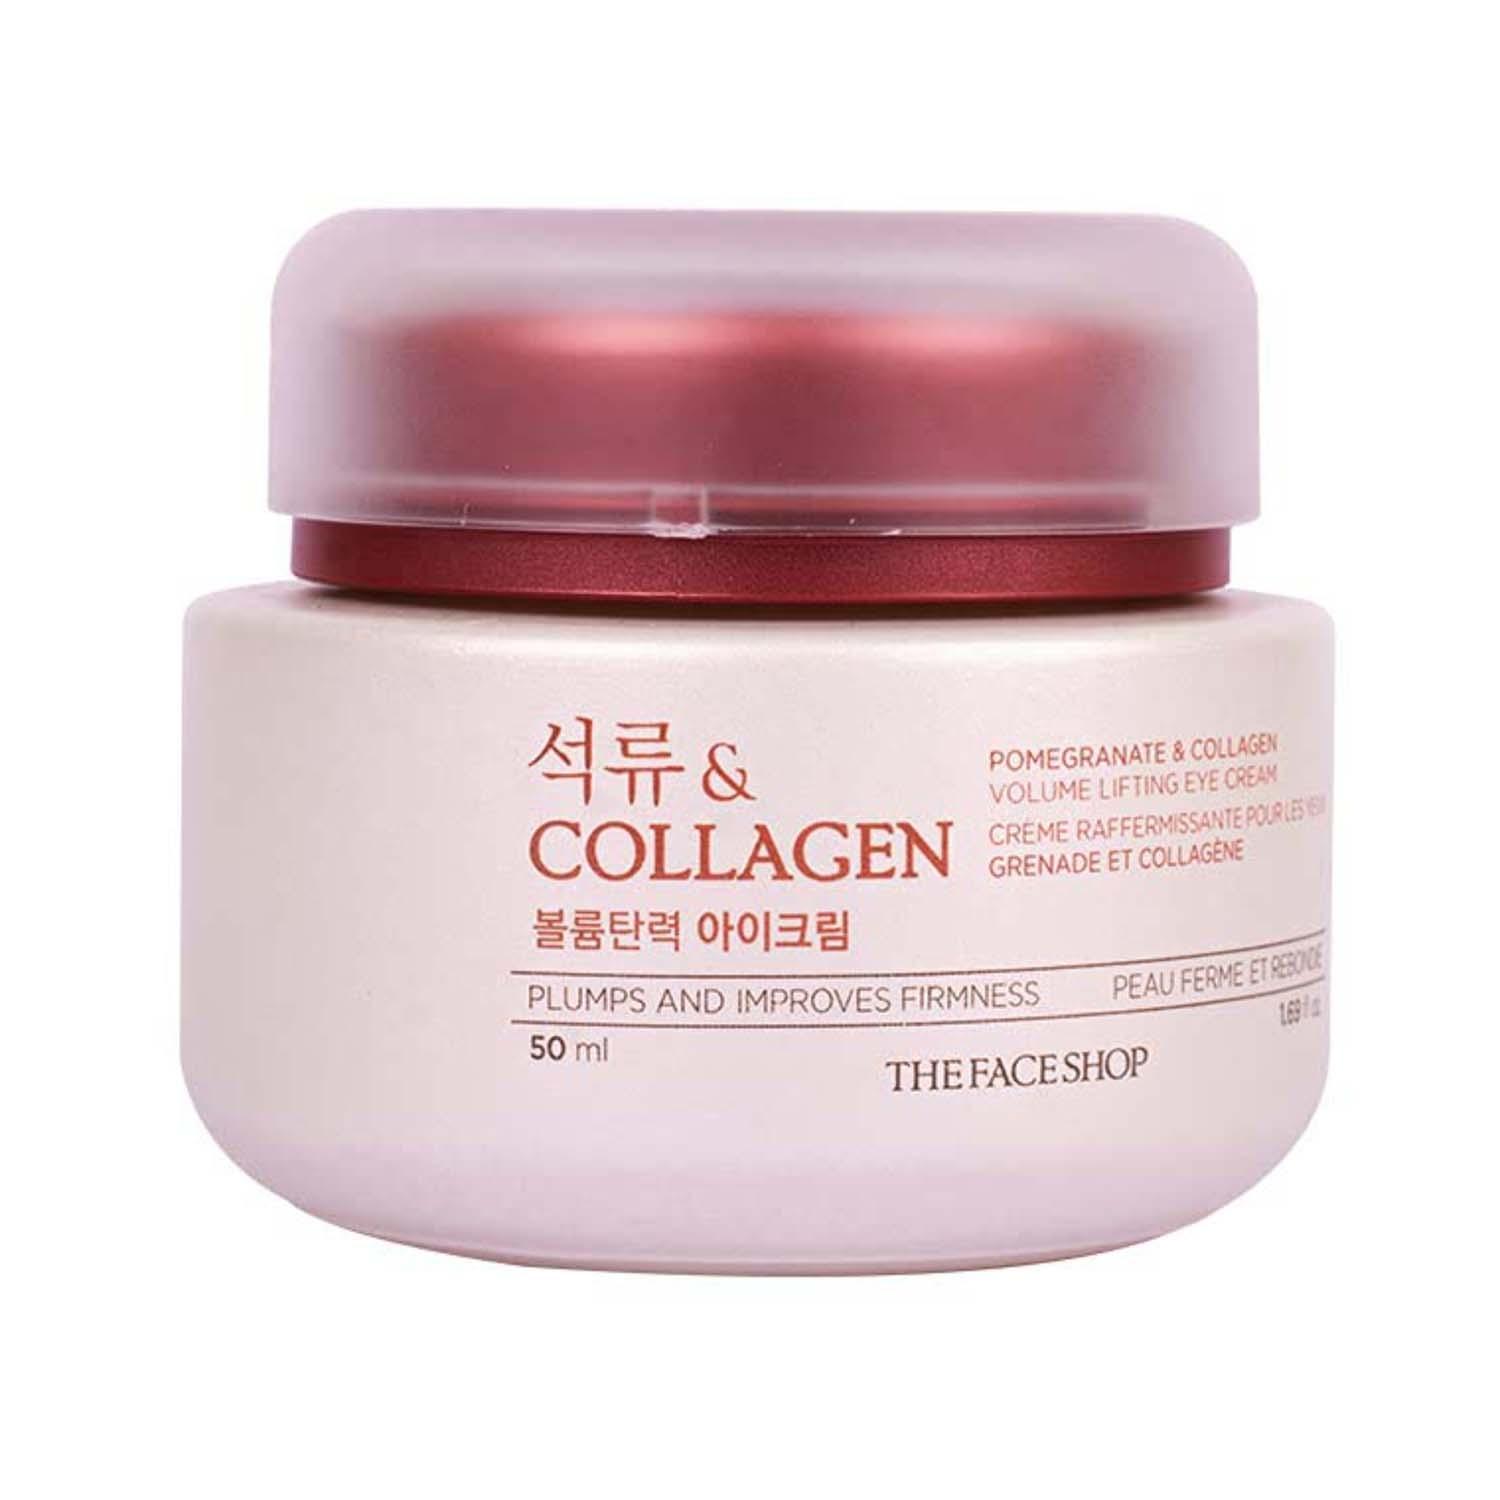 the-face-shop-pomegranate-and-collagen-volume-lifting-eye-cream-(50ml)